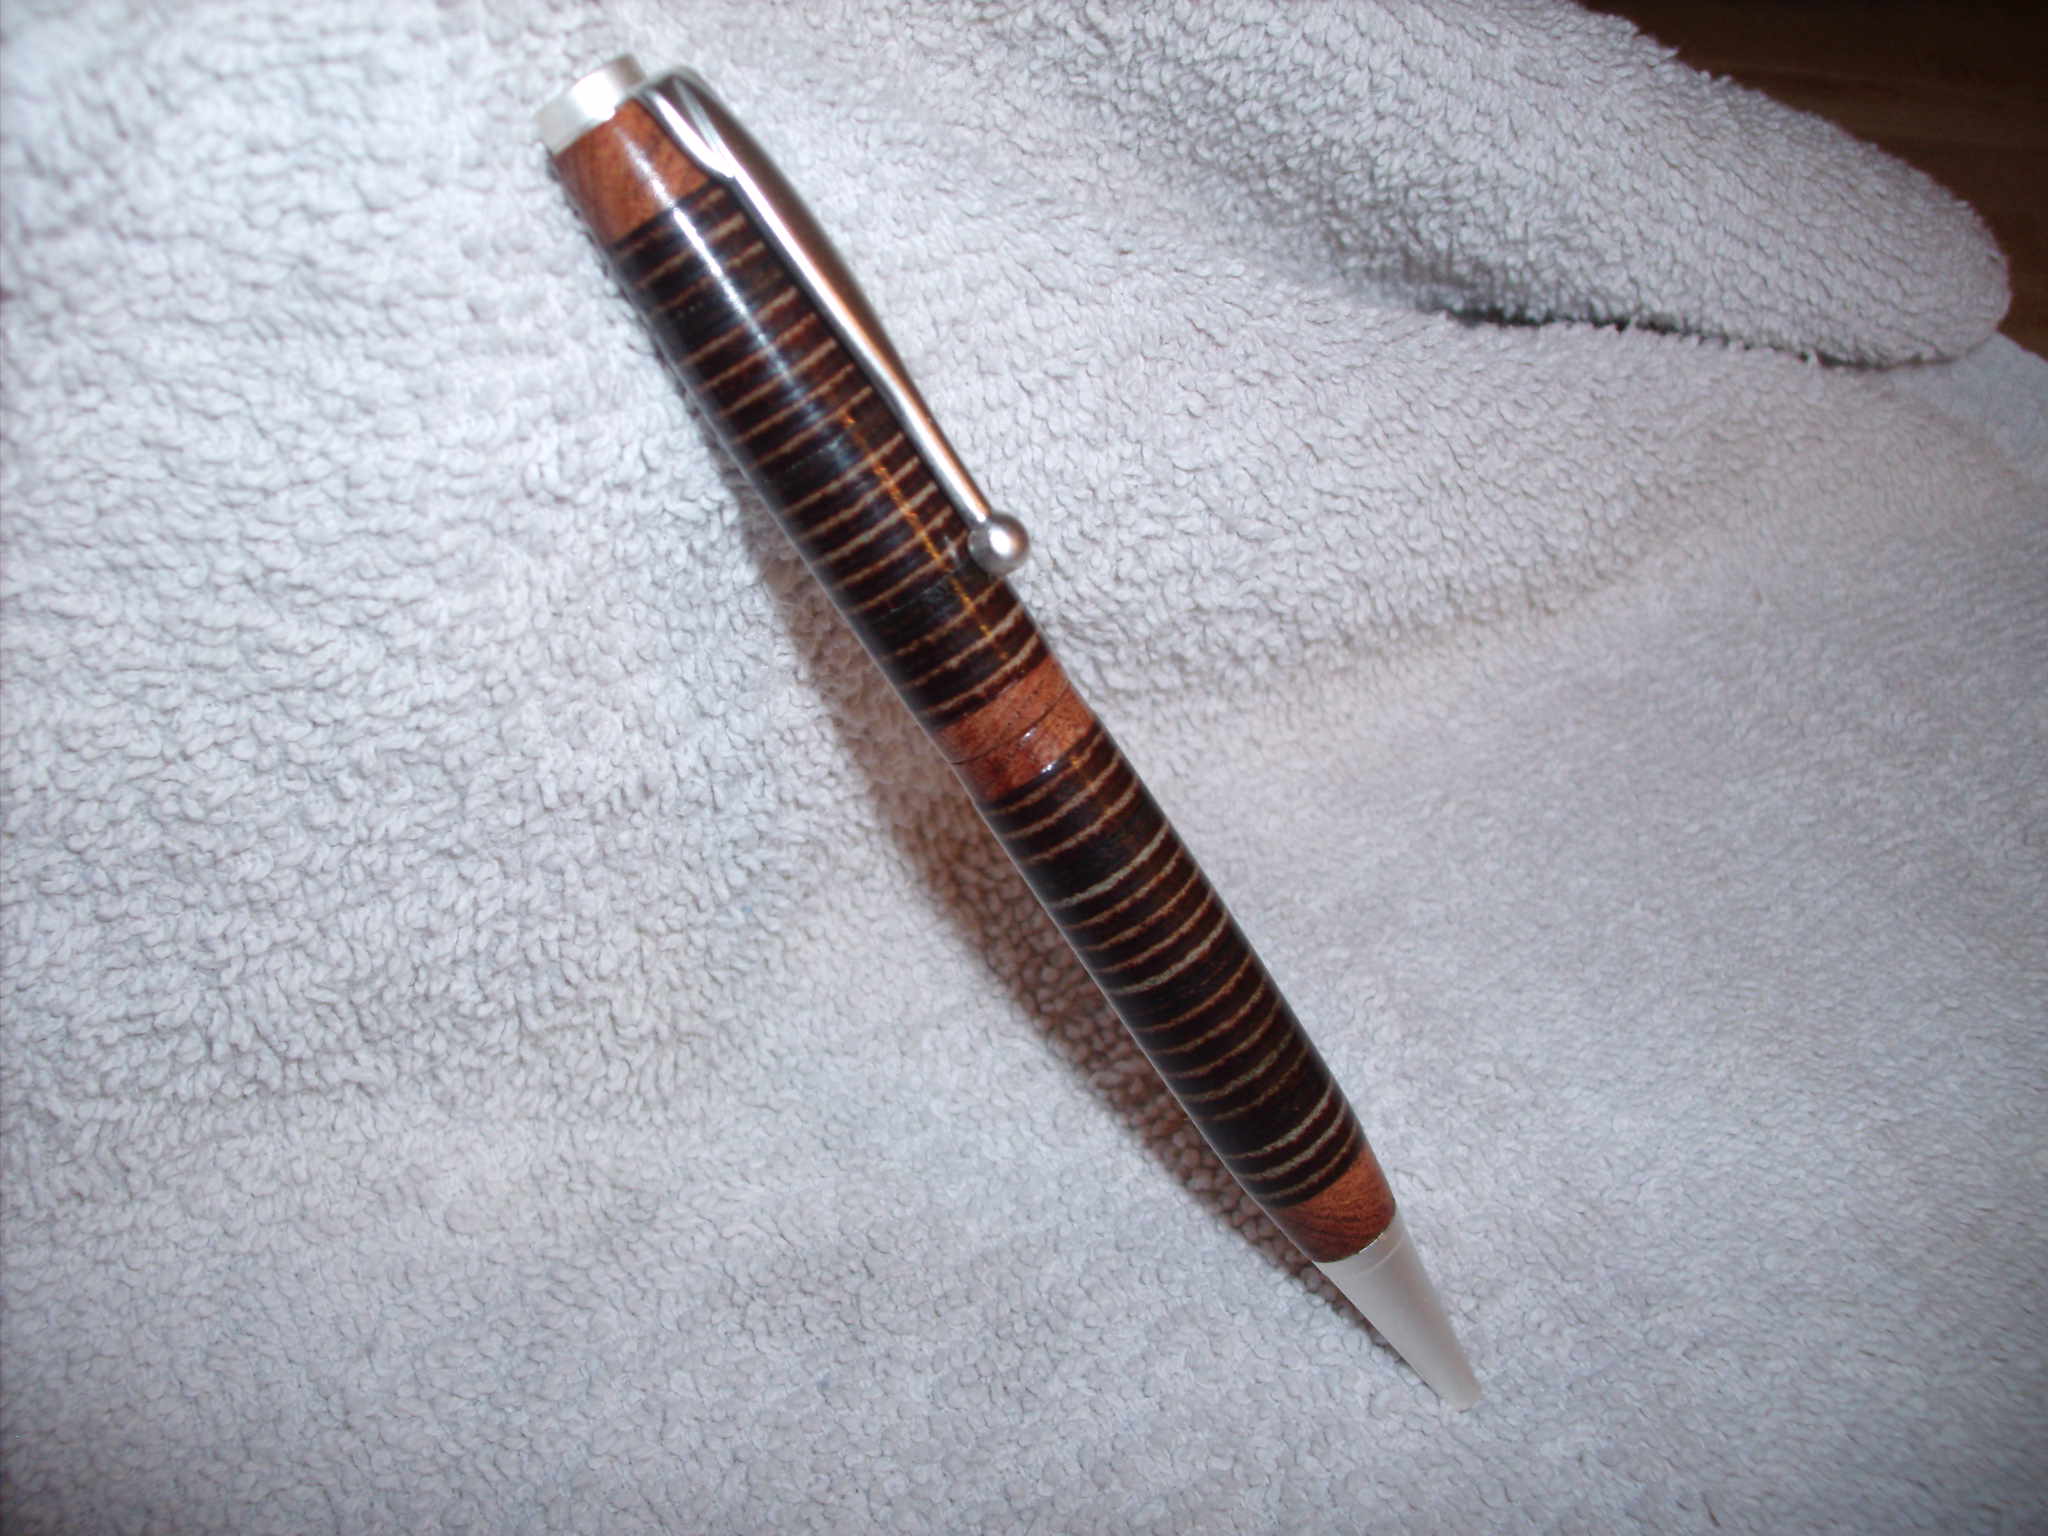 My version of the leather pen